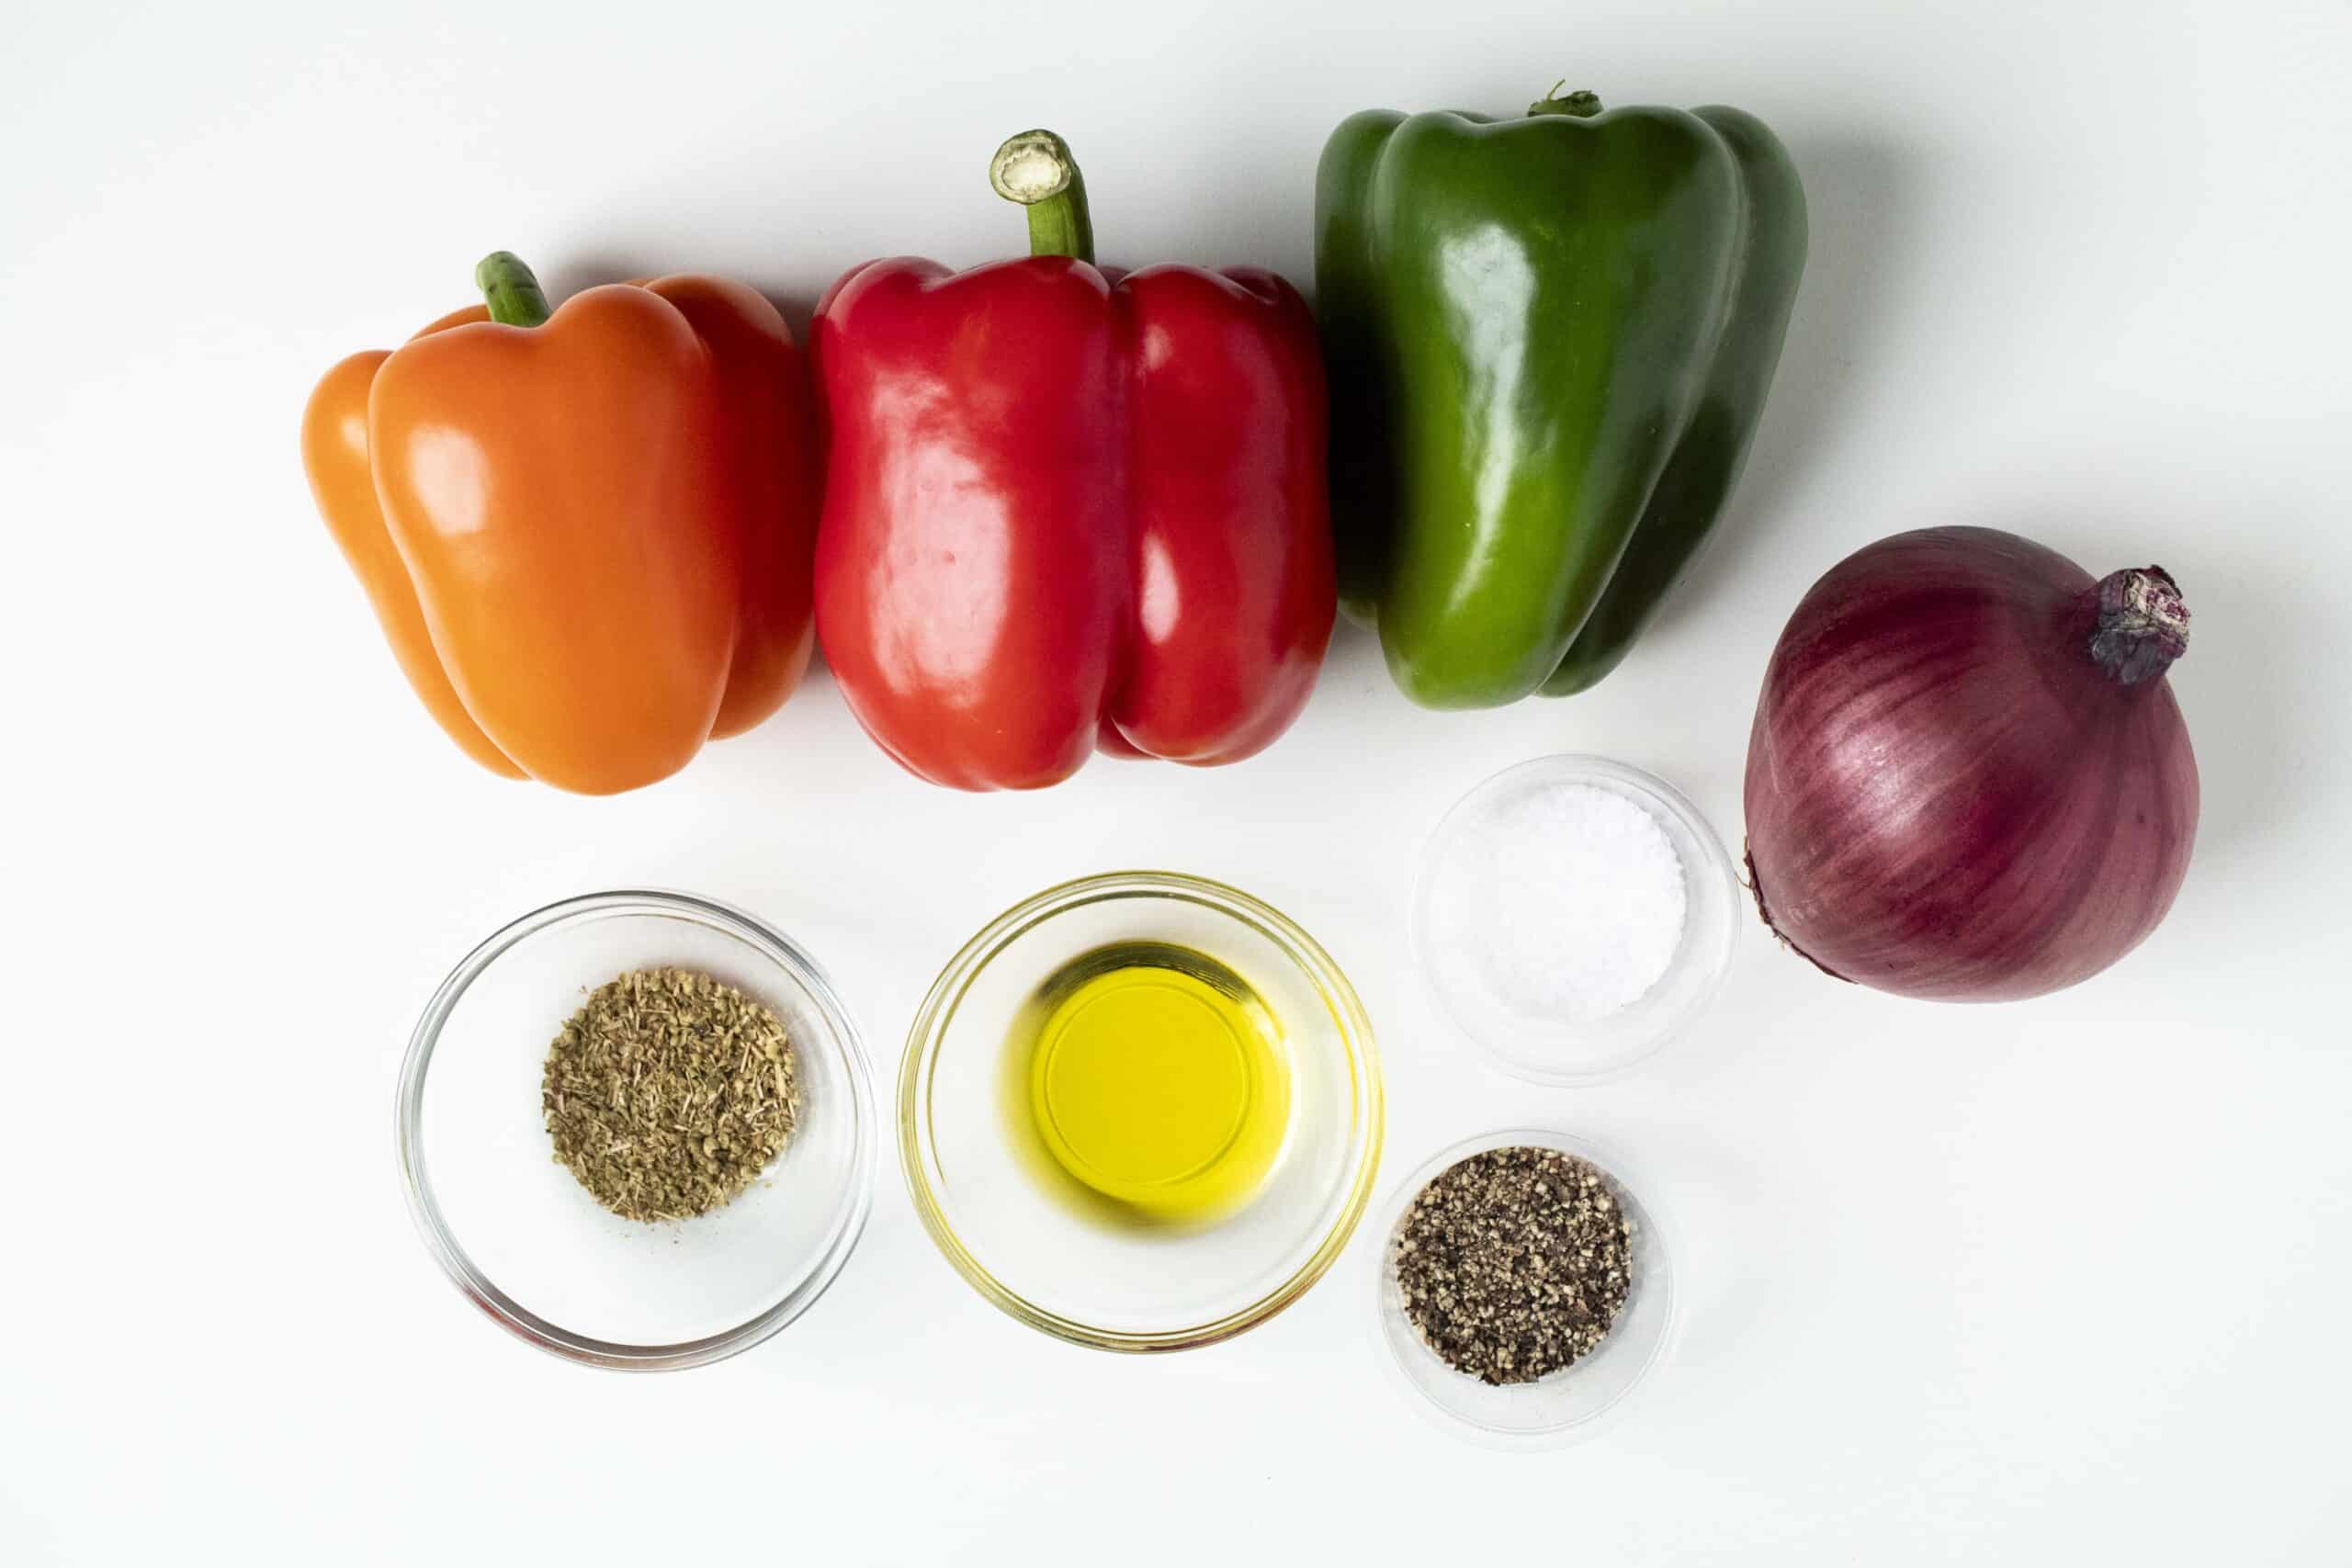 Ingredients for air fryer fajita vegetables including bell peppers, red onion, olive oil, oregano, salt, and pepper.